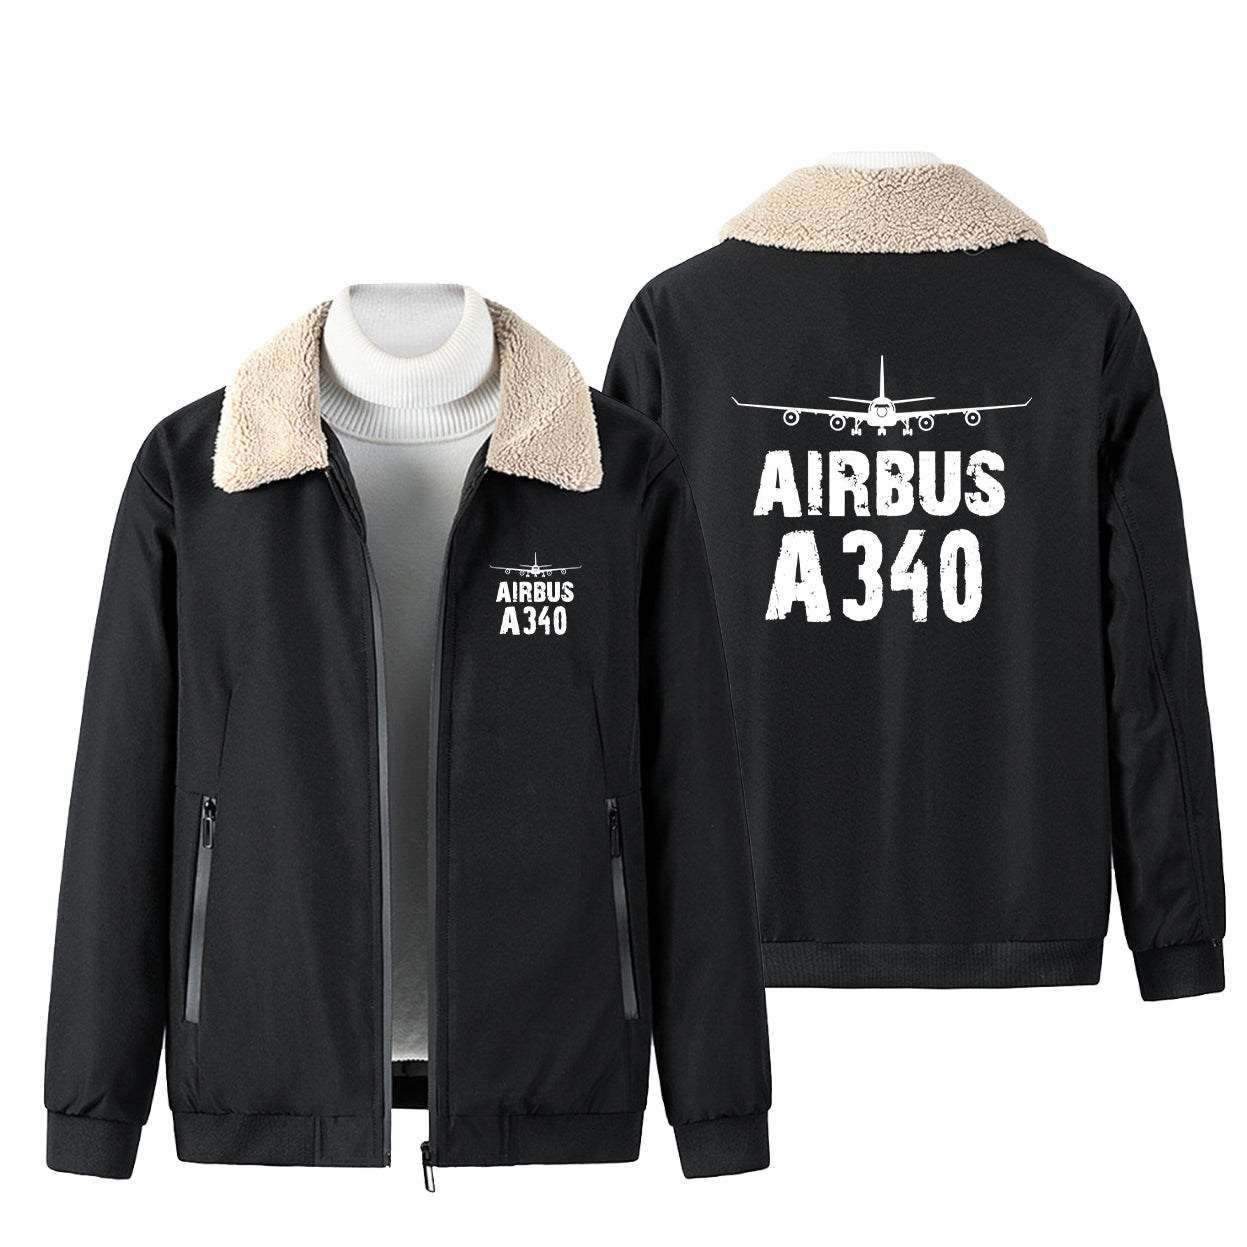 Airbus A340 & Plane Designed Winter Bomber Jackets